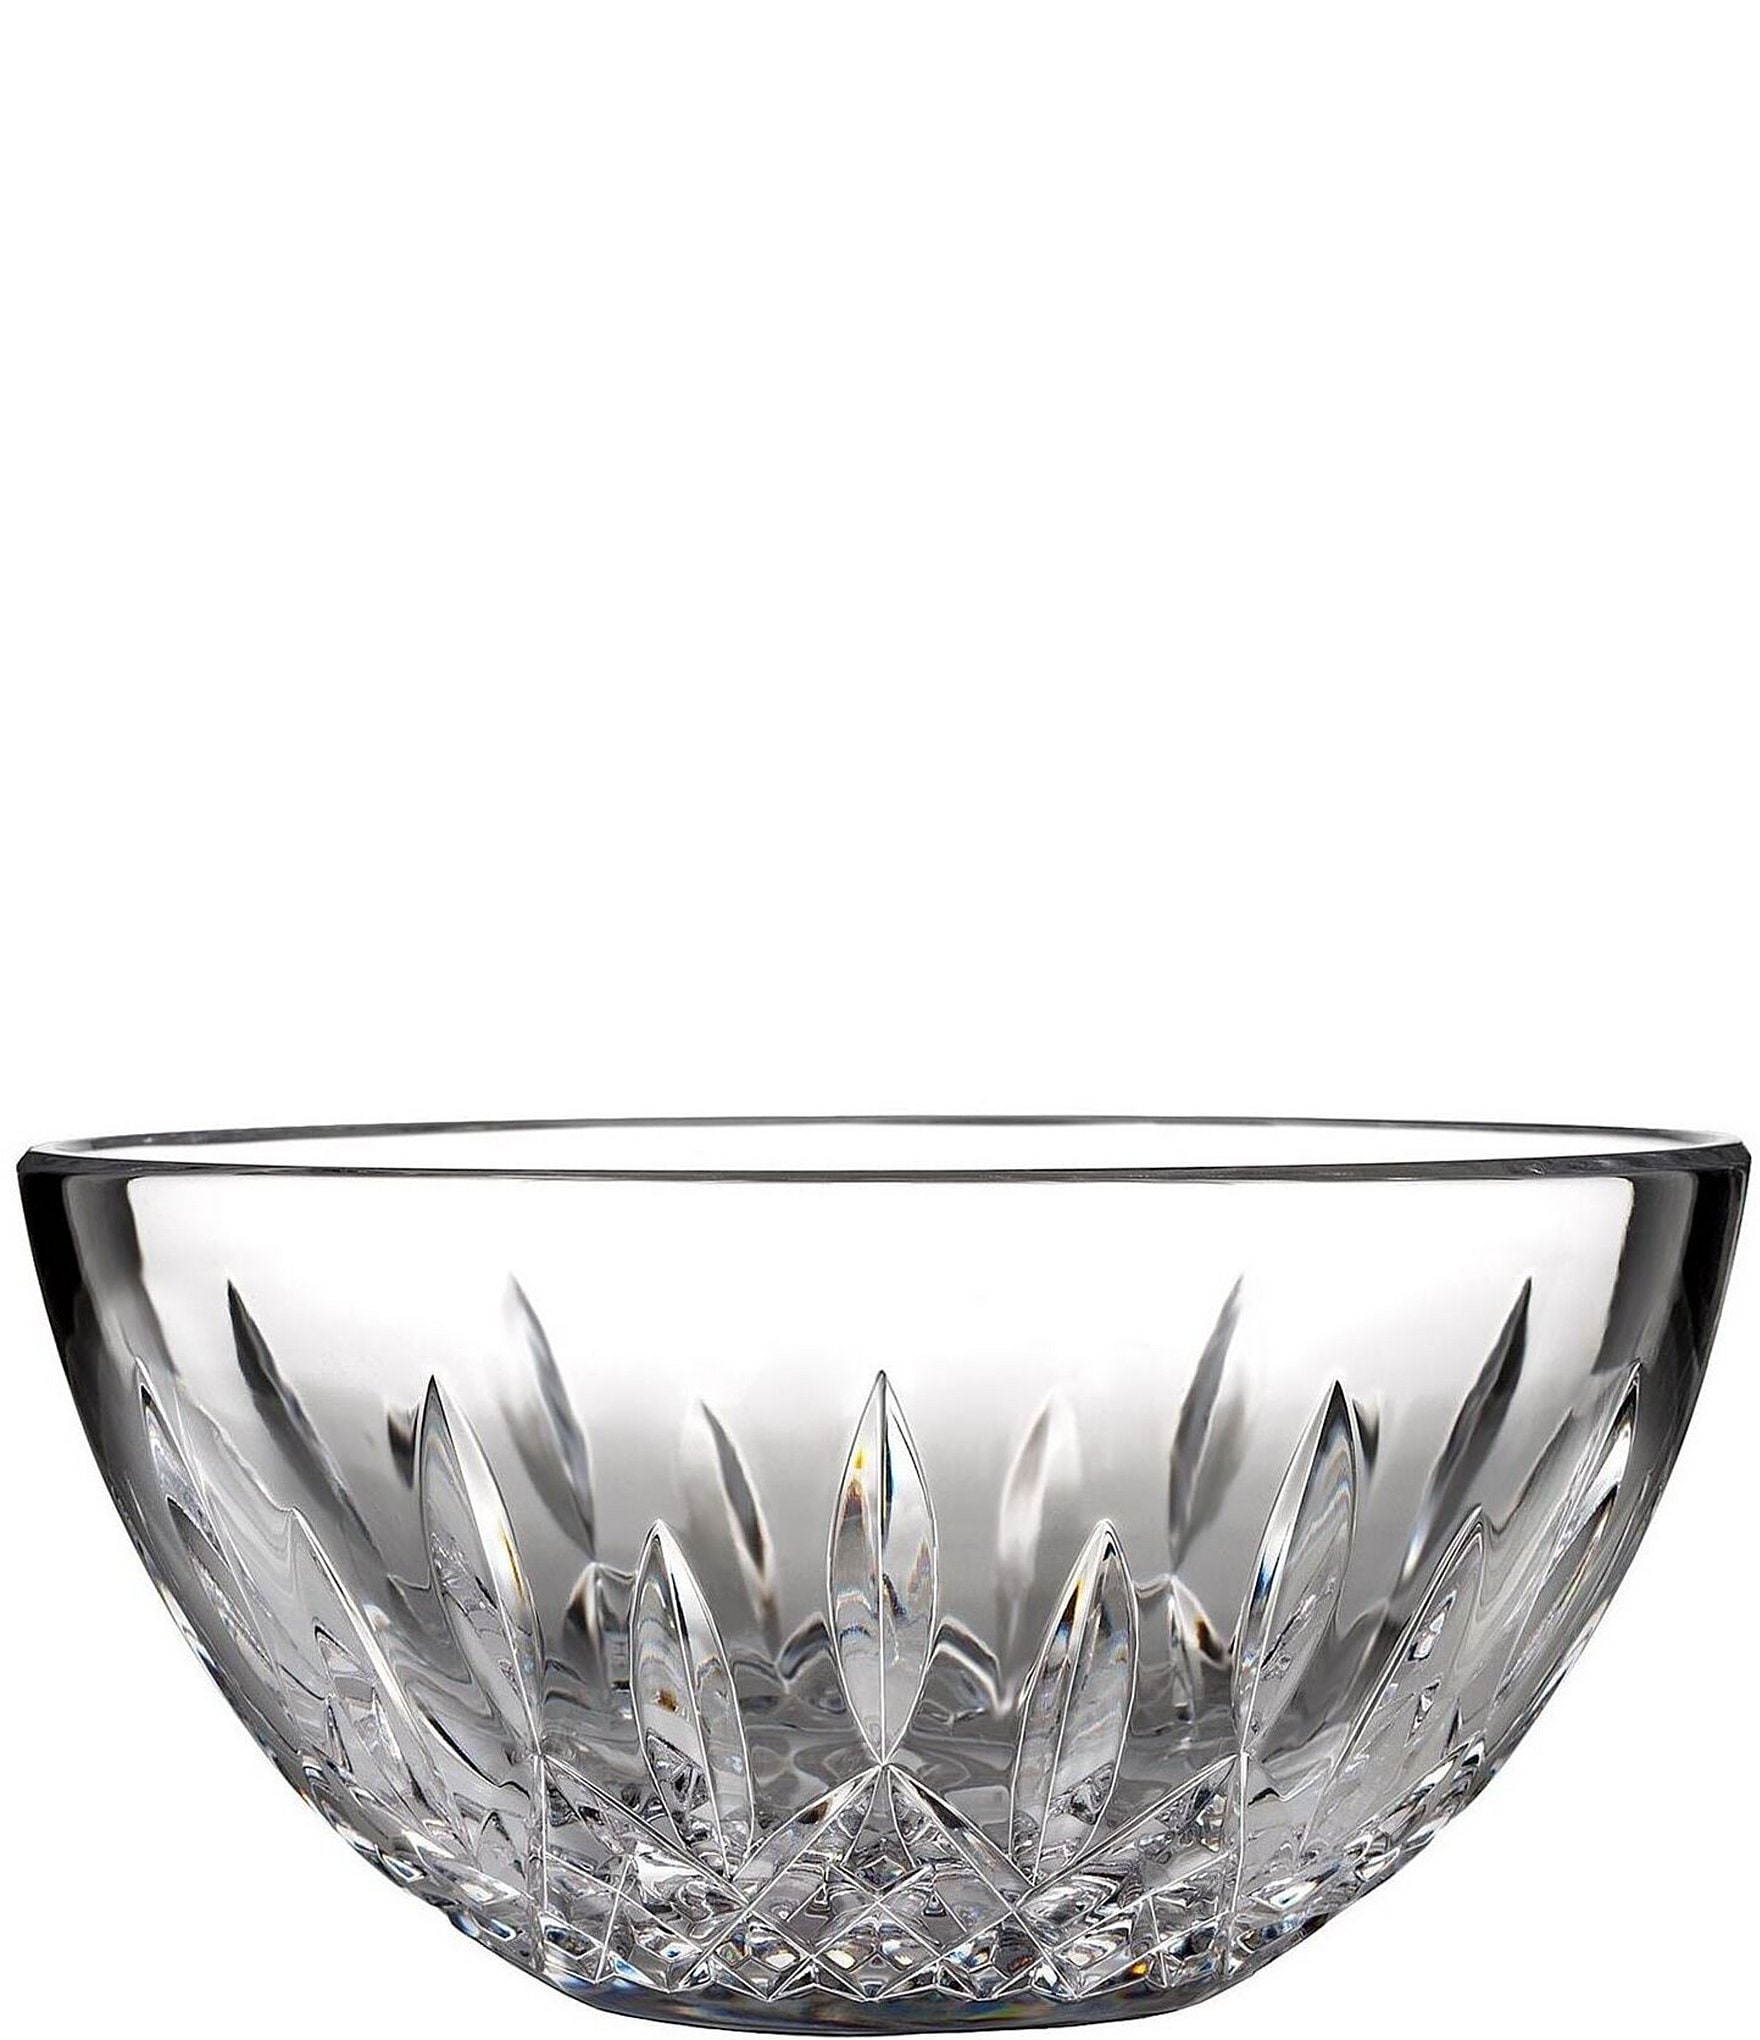 https://dimg.dillards.com/is/image/DillardsZoom/zoom/waterford-crystal-lismore-60th-anniversary-collection-bowl/03714053_zi.jpg